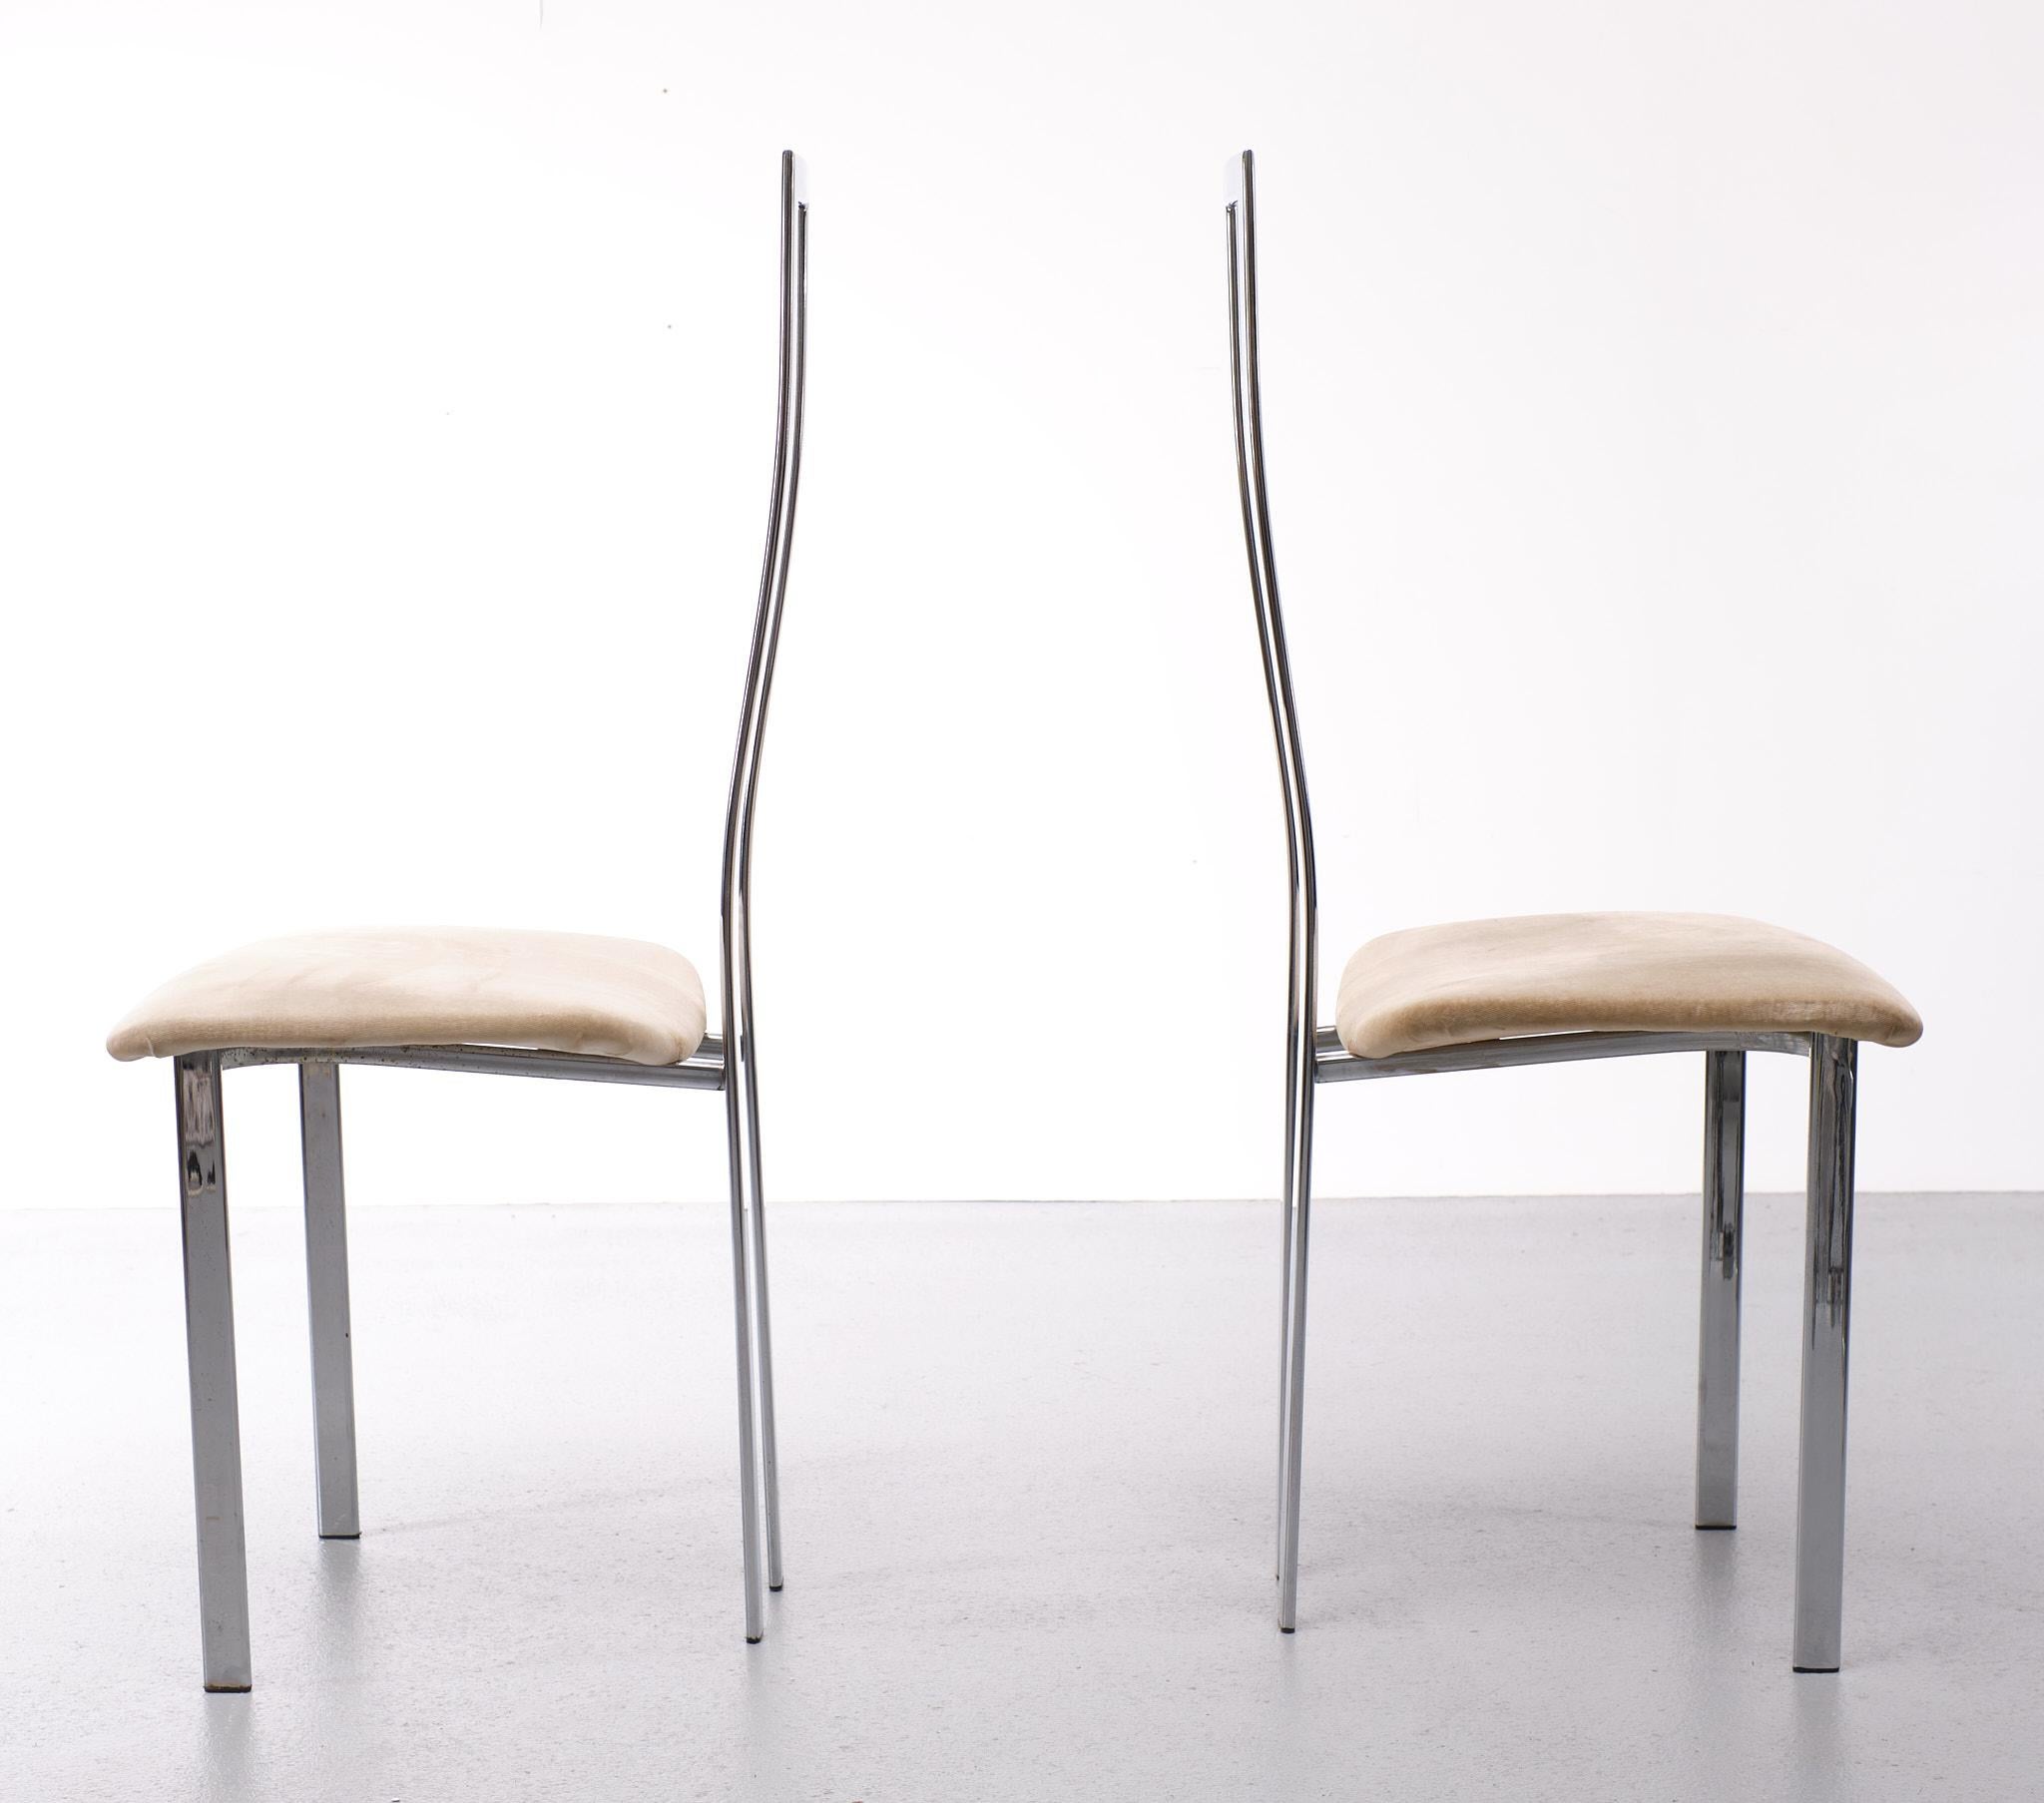 Postmodern Chrome Chairs Maurizio Cattelan, Italy, 1980s For Sale 1